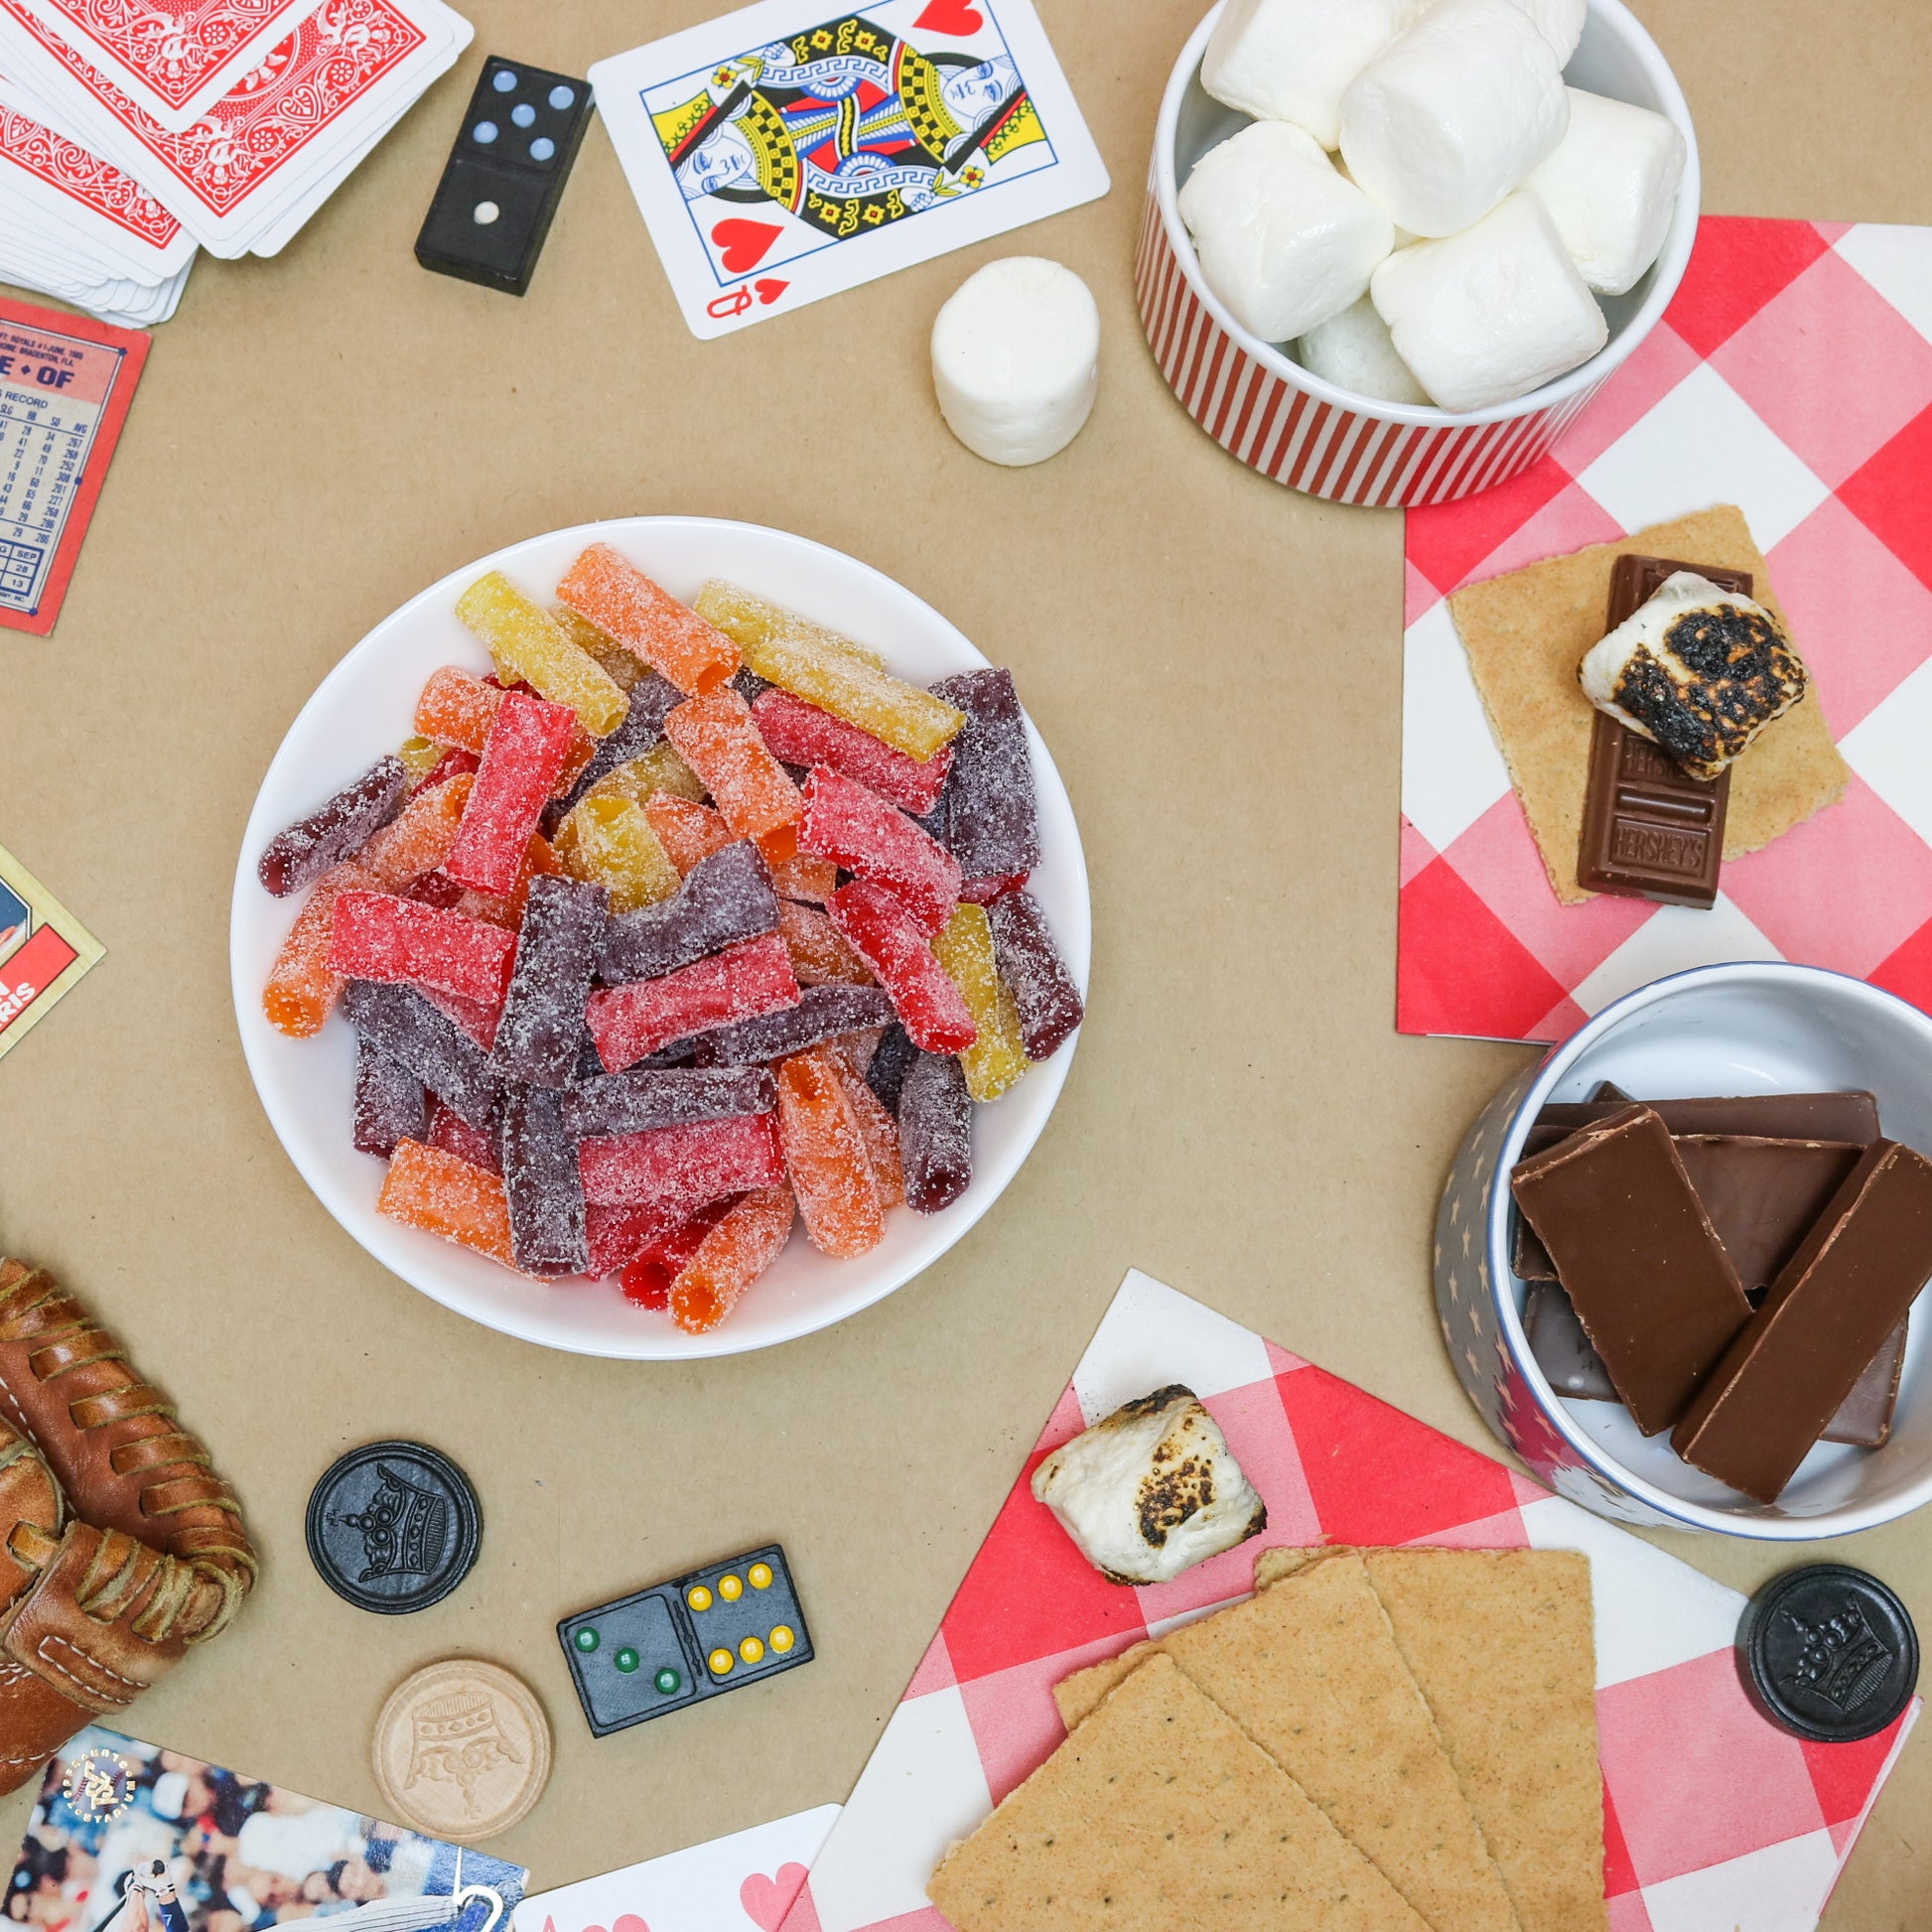 SOUR PUNCH Fan Favorite Bites with game night and s'mores materials